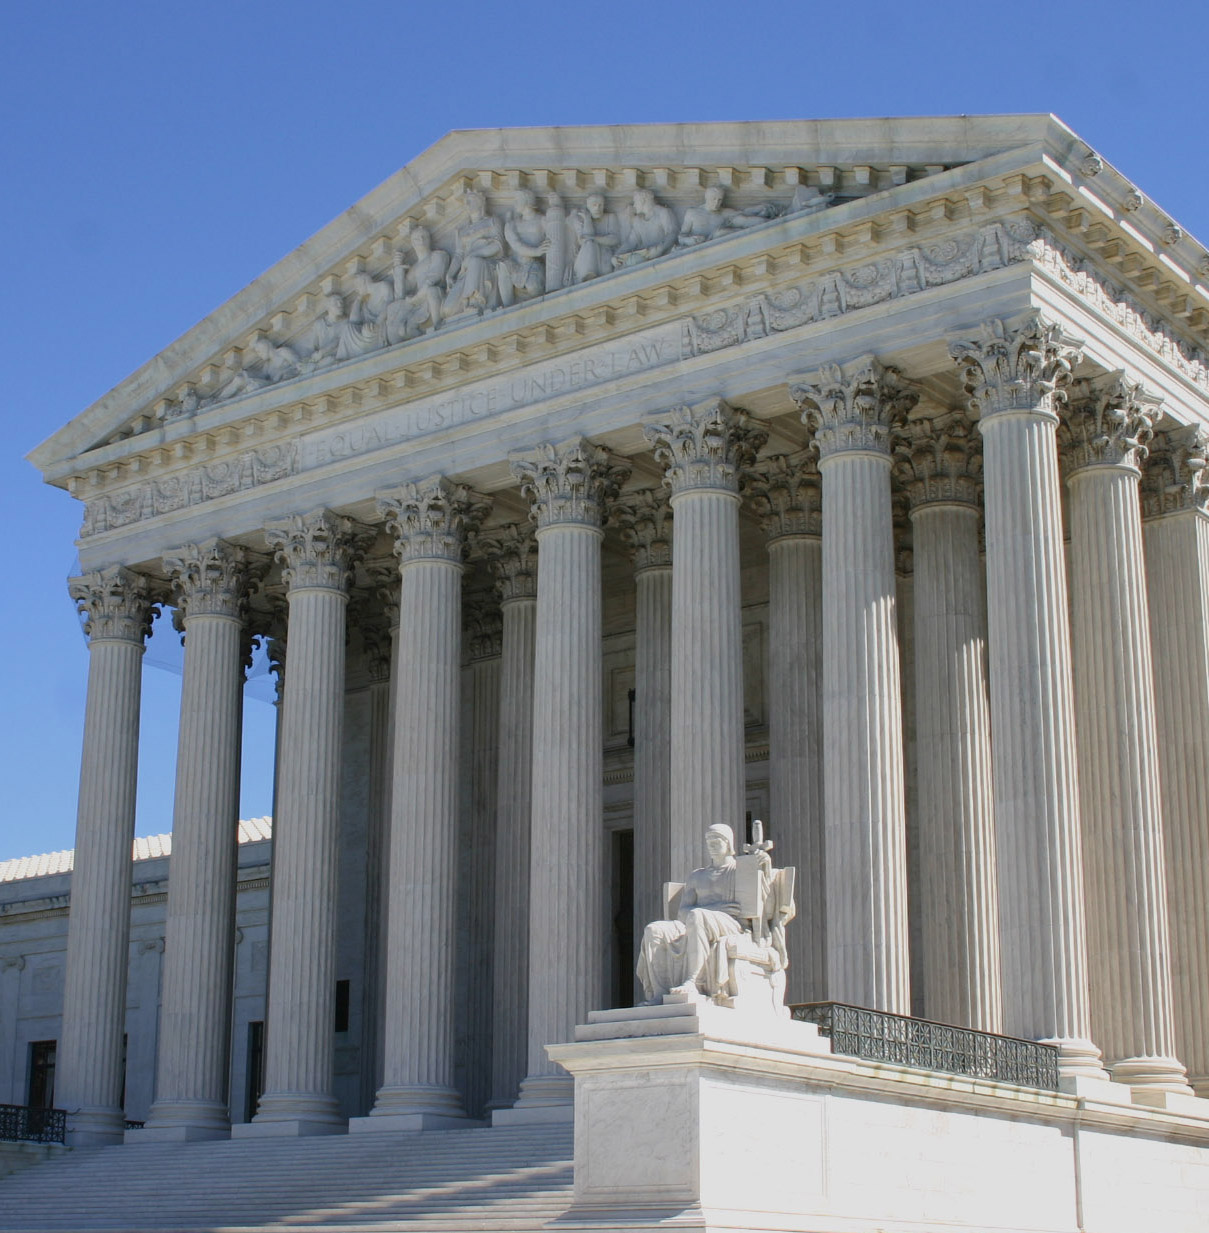 US Supreme Court - picture by dbking on Flickr - free licencse